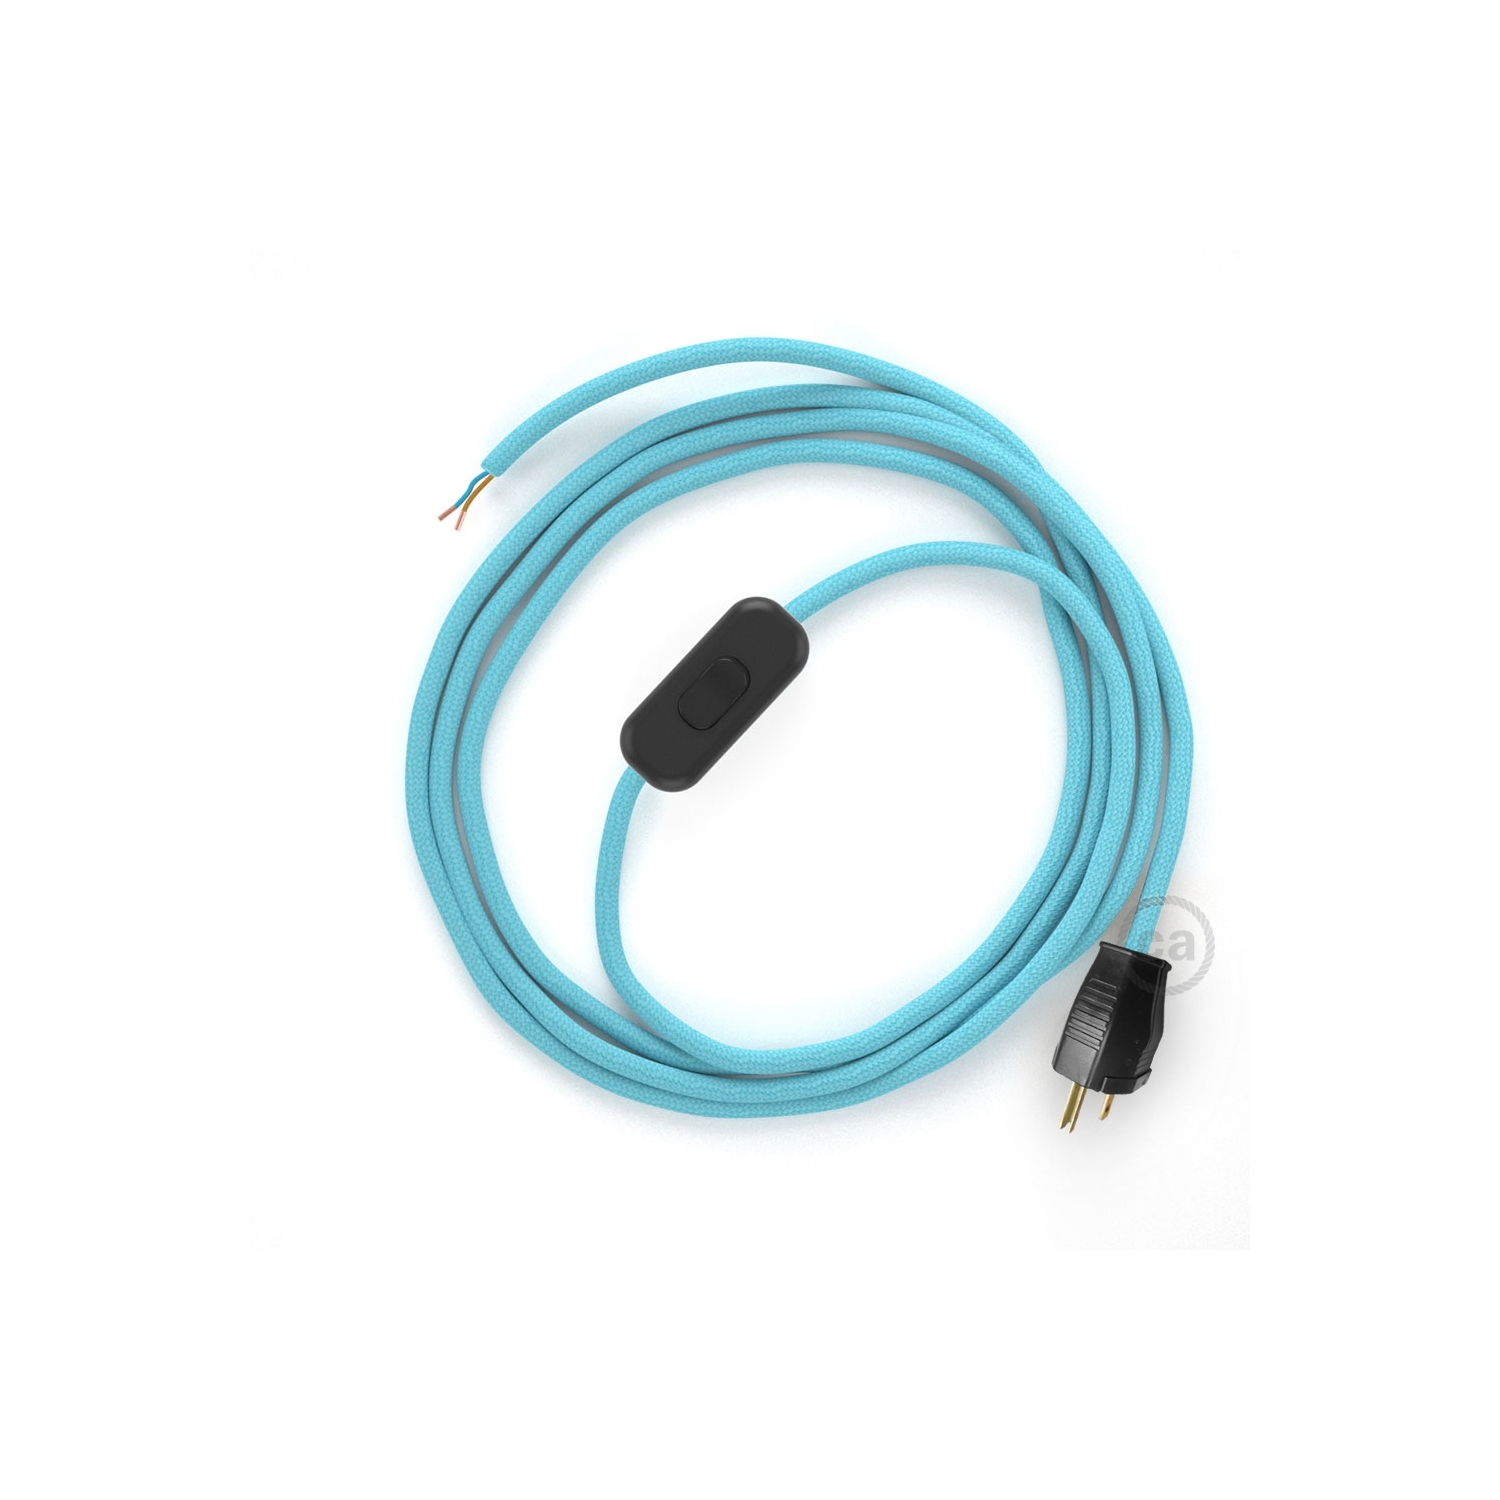 Power Cord with in-line switch, RM17 Baby Blue Rayon - Choose color of switch/plug